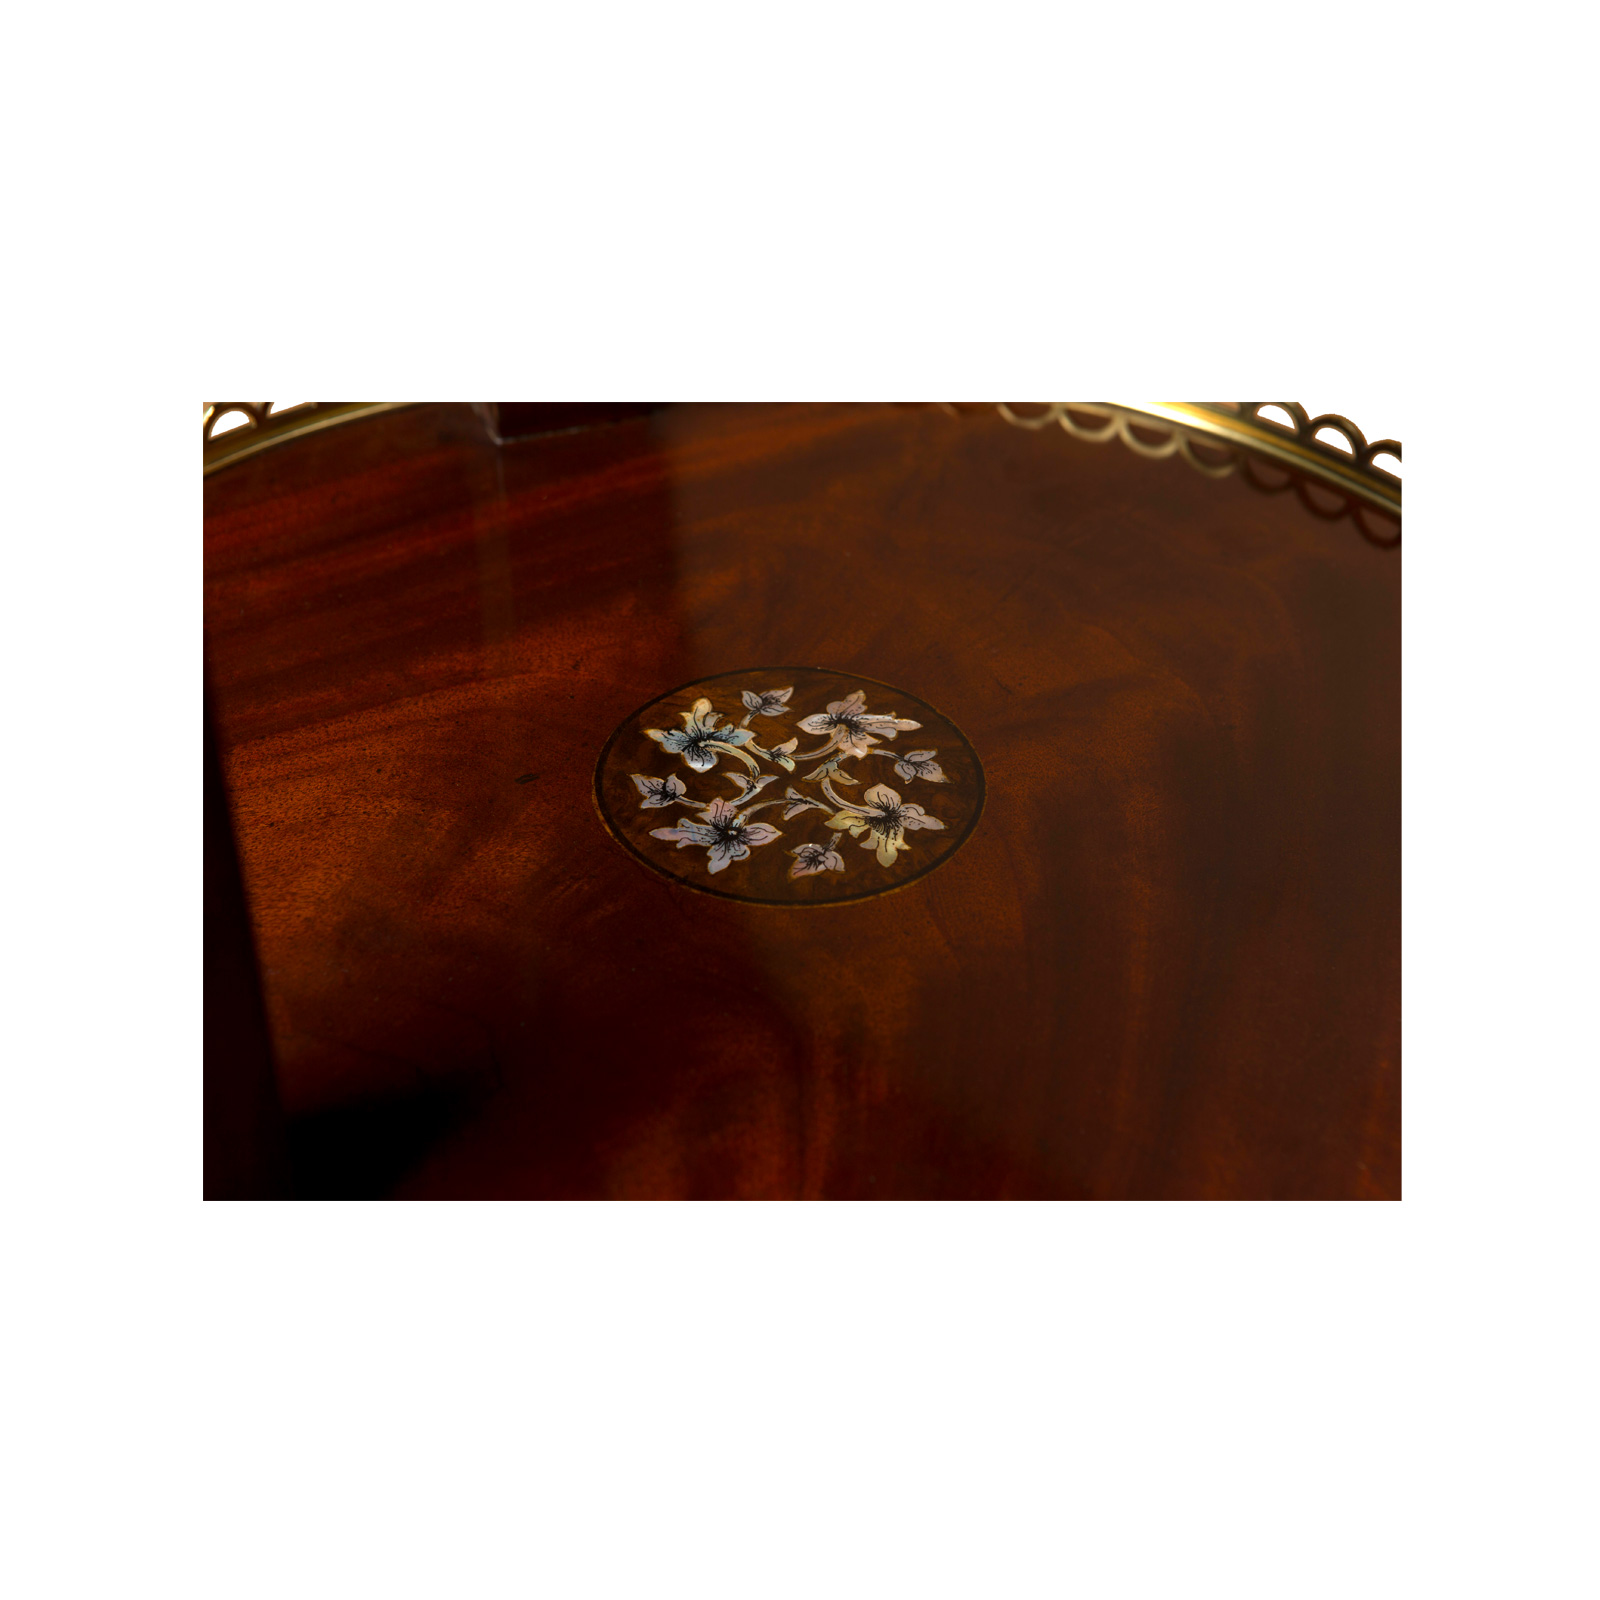 Evident in every piece of furniture is intricate attention to the smallest details, whether a piece of hardware, hand painted flower or leaf, carving or intricate inlays all done by hand.